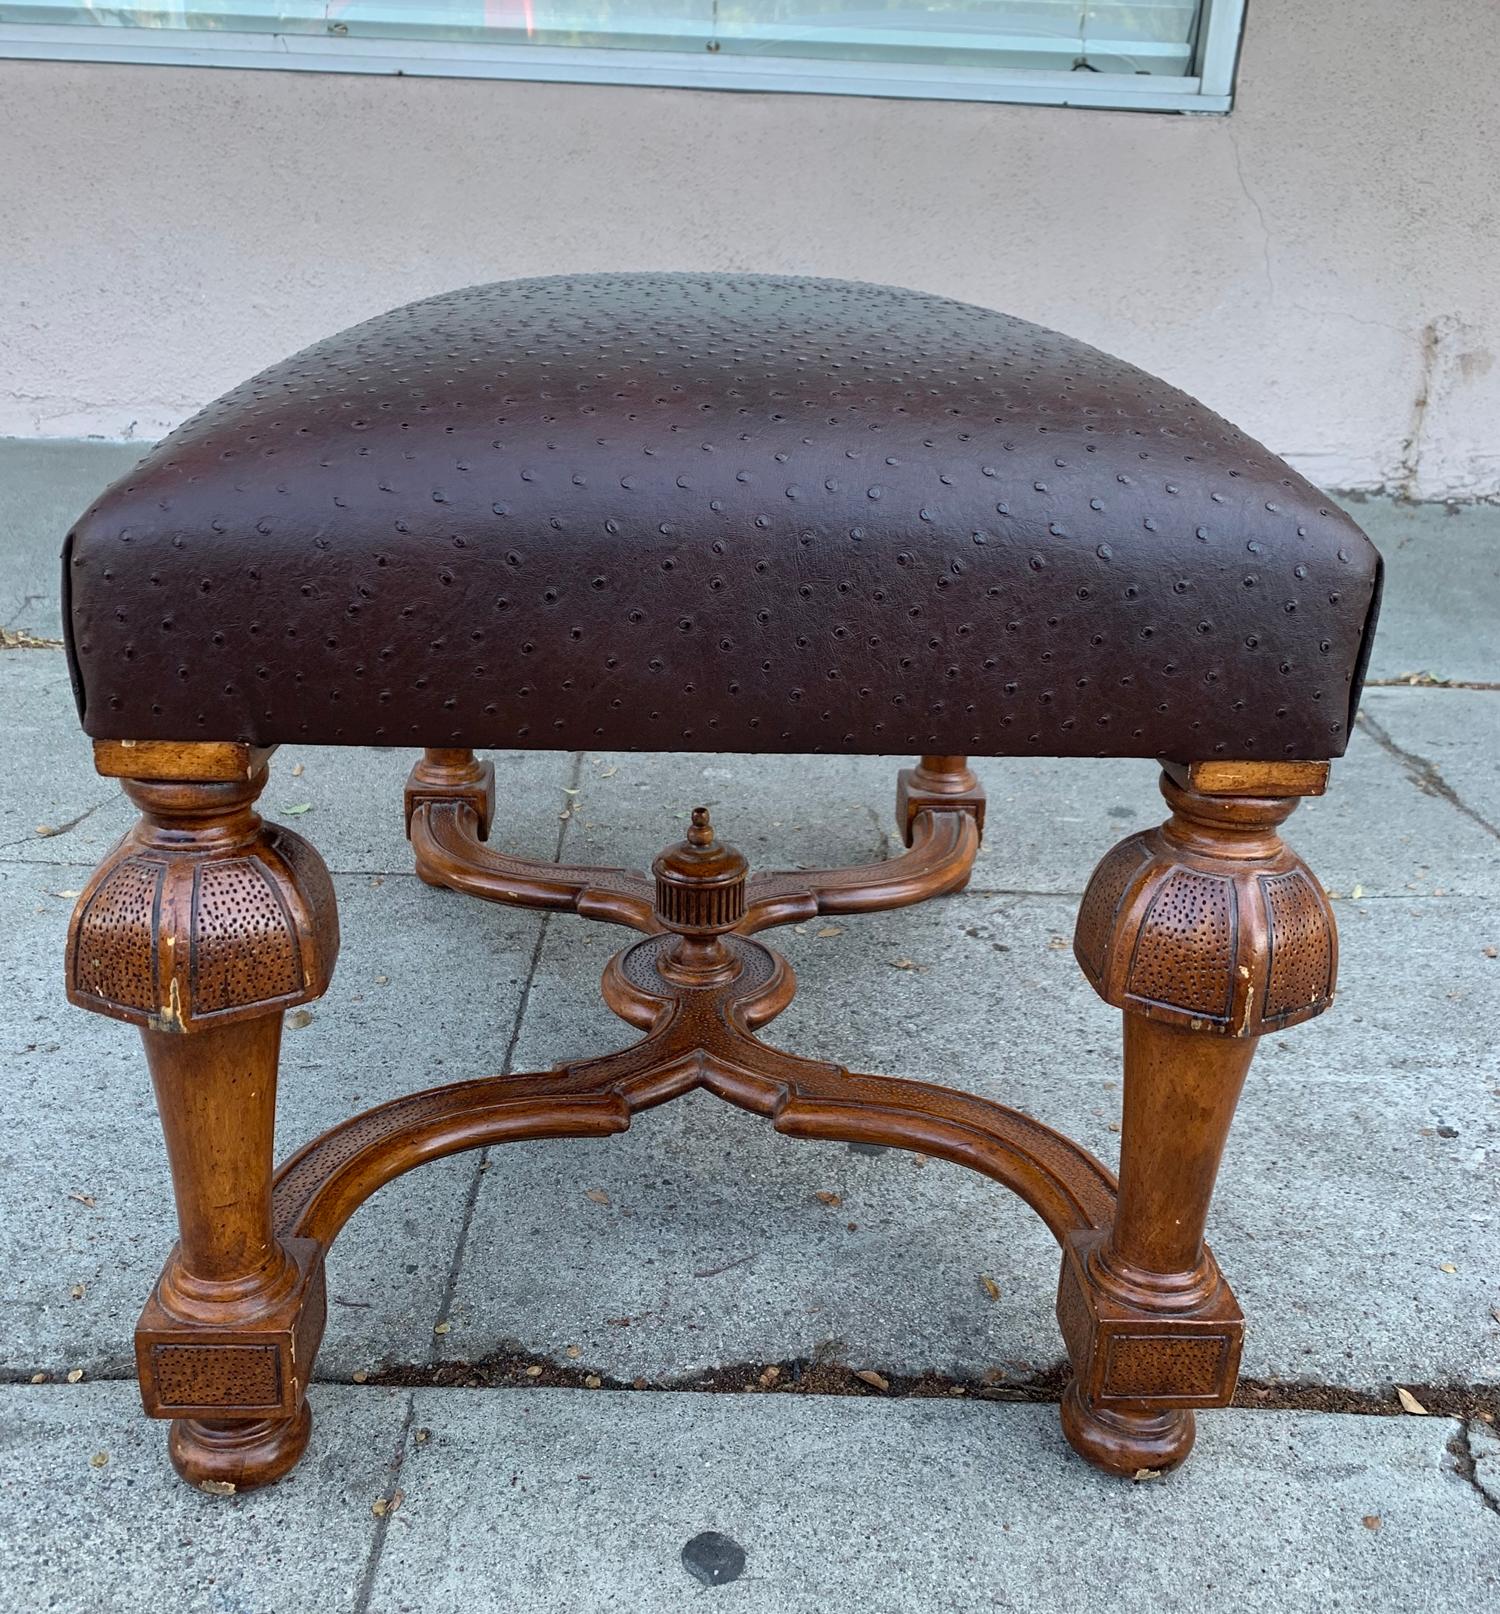 Vintage Bench/Ottoman Upholstered in Faux Ostrich Leather 2